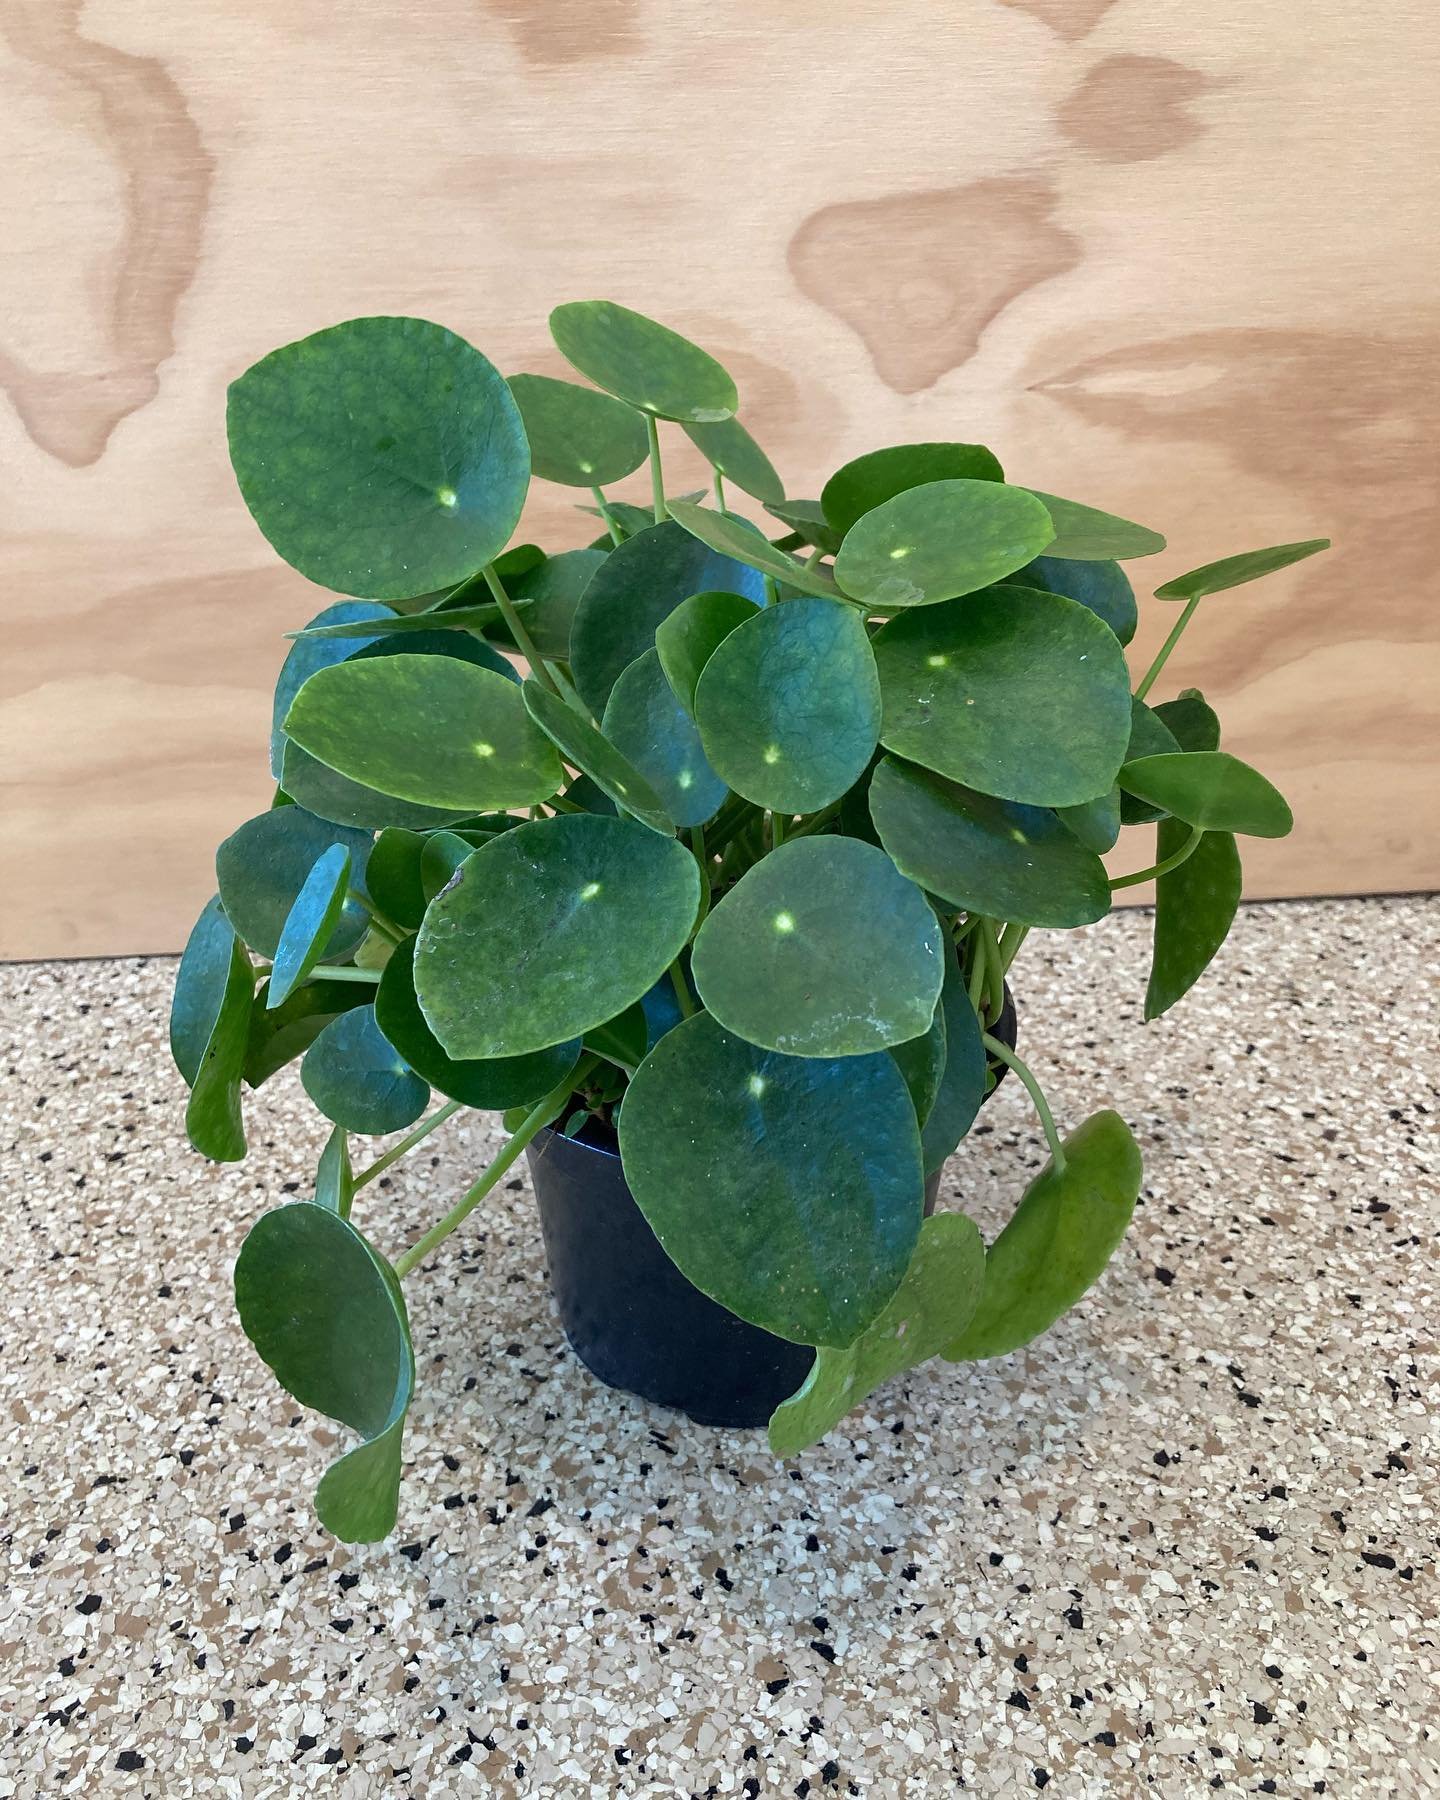 Back in stock! Pilea Peperomioides in 6&rdquo; pots 🪴 Come grab one while they&rsquo;re here!

#pileapeperomioides #plants #chinesemoneyplant #dreamplant #plantshop #plantstore #saturdayshopping #sunny #tropical